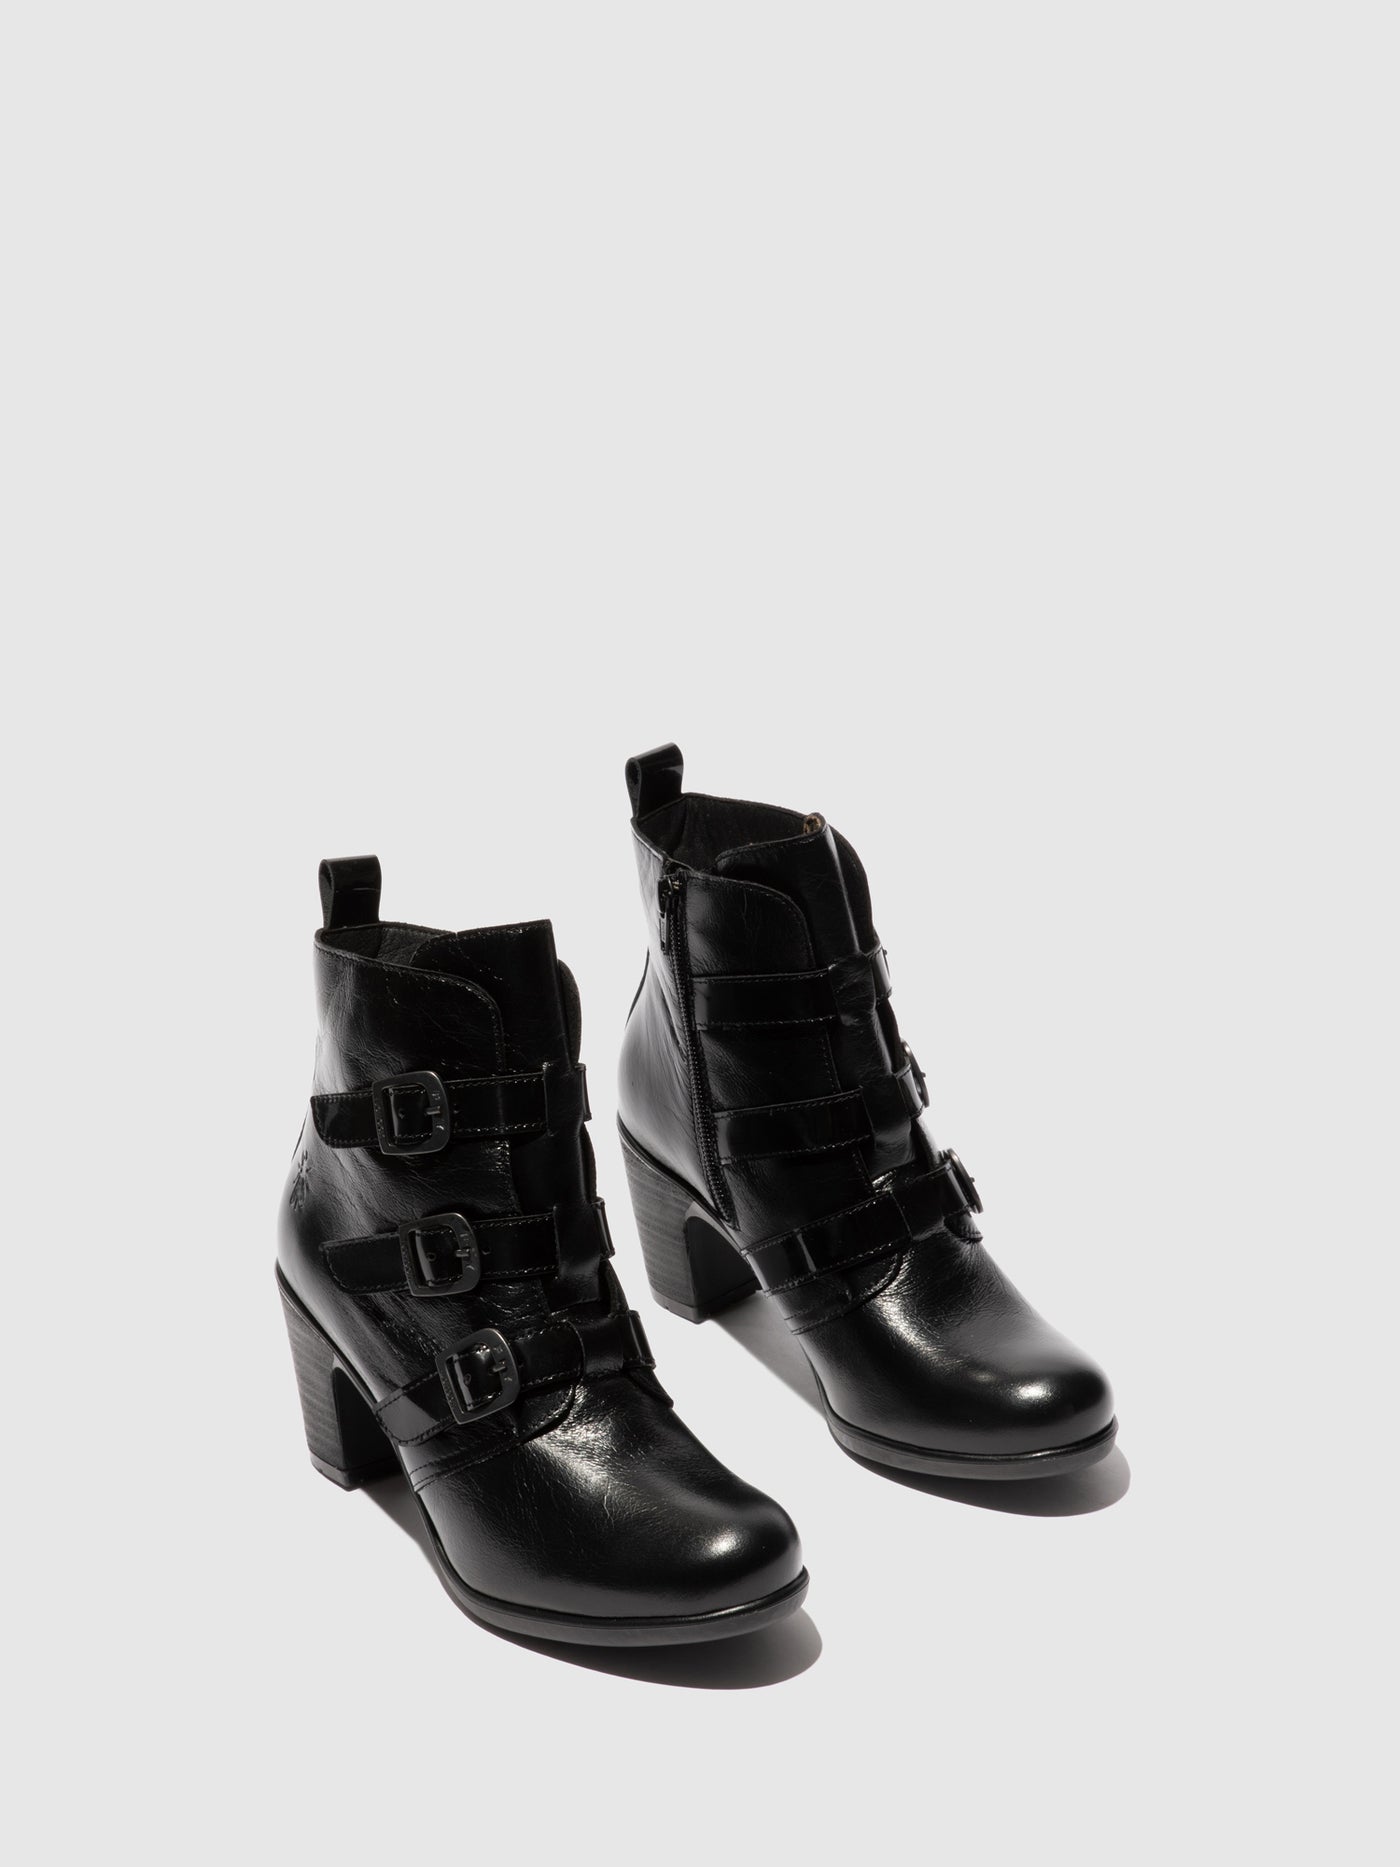 Buckle Ankle Boots KLEA012FLY BLACK